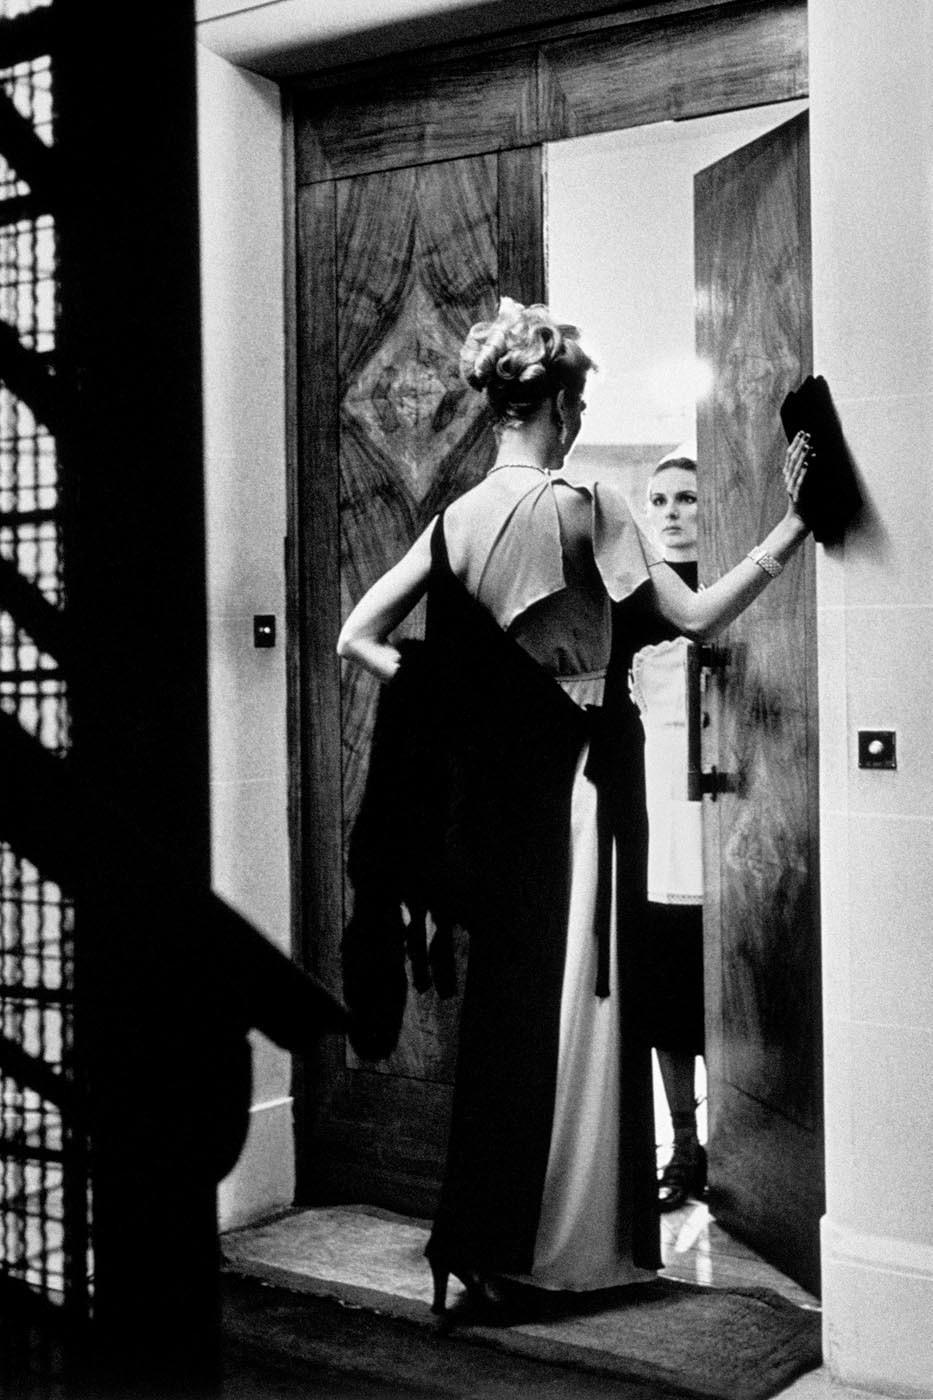 In "16th Arrondissement, Paris, 1975" Helmut Newton subtly plays on the relationship between lady and maid. A forcefully placed hand on the side of the door and intense matching of gaze accentuates the suggestive tension of the image heightened by